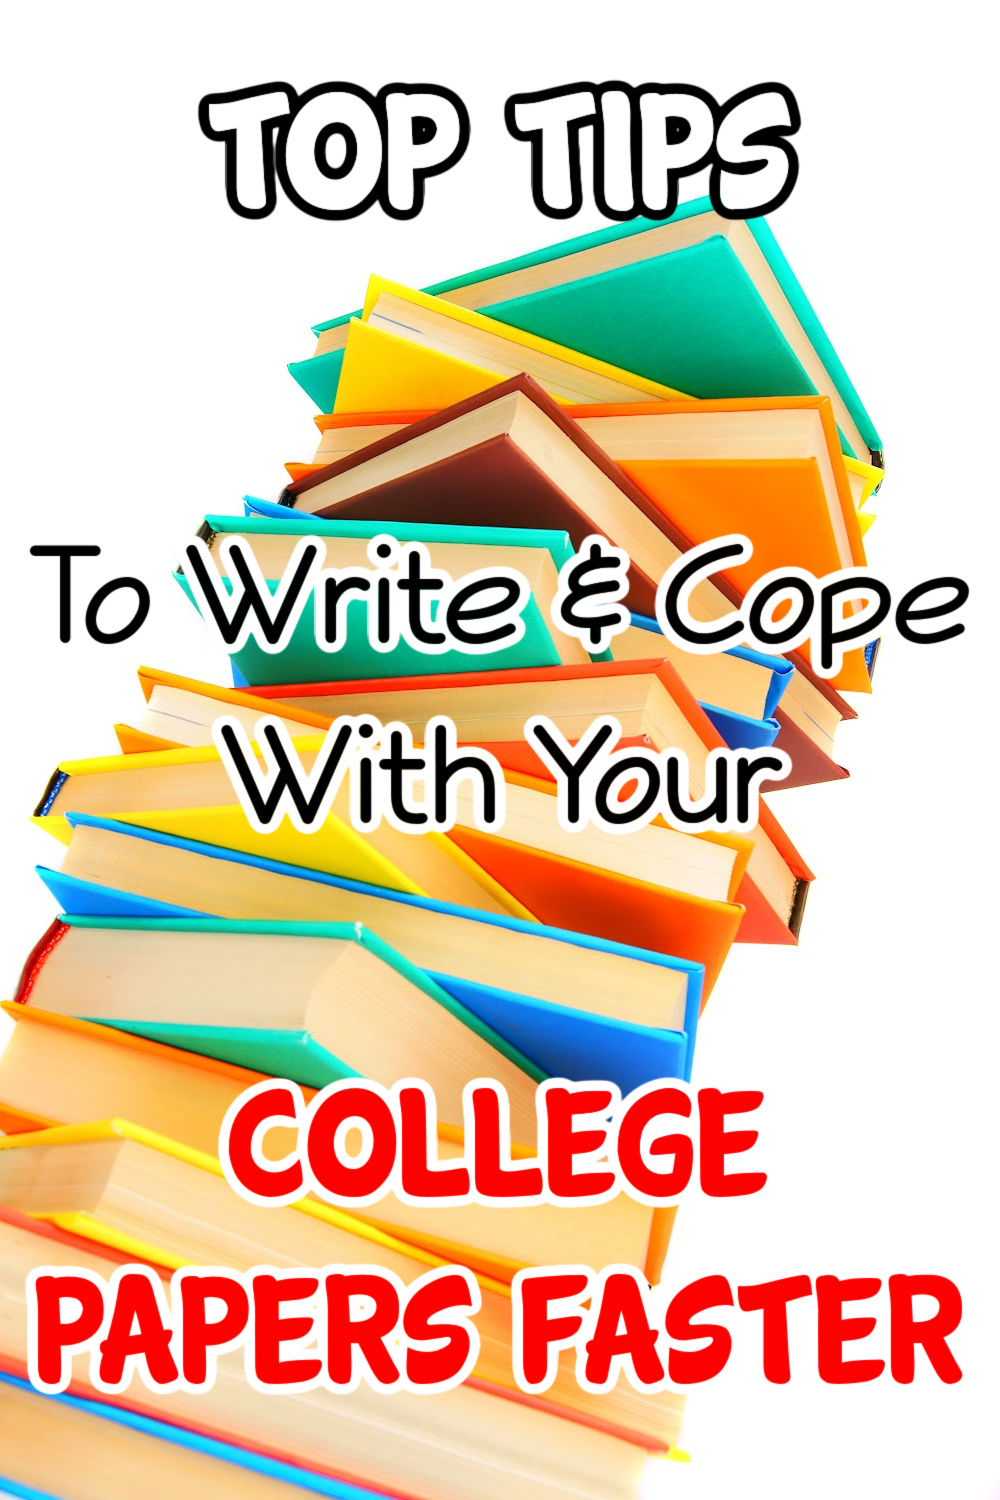 Being a student is a tough job, especially when you need to write many academic papers. Fortunately, there are ways to cope with your college essays faster.